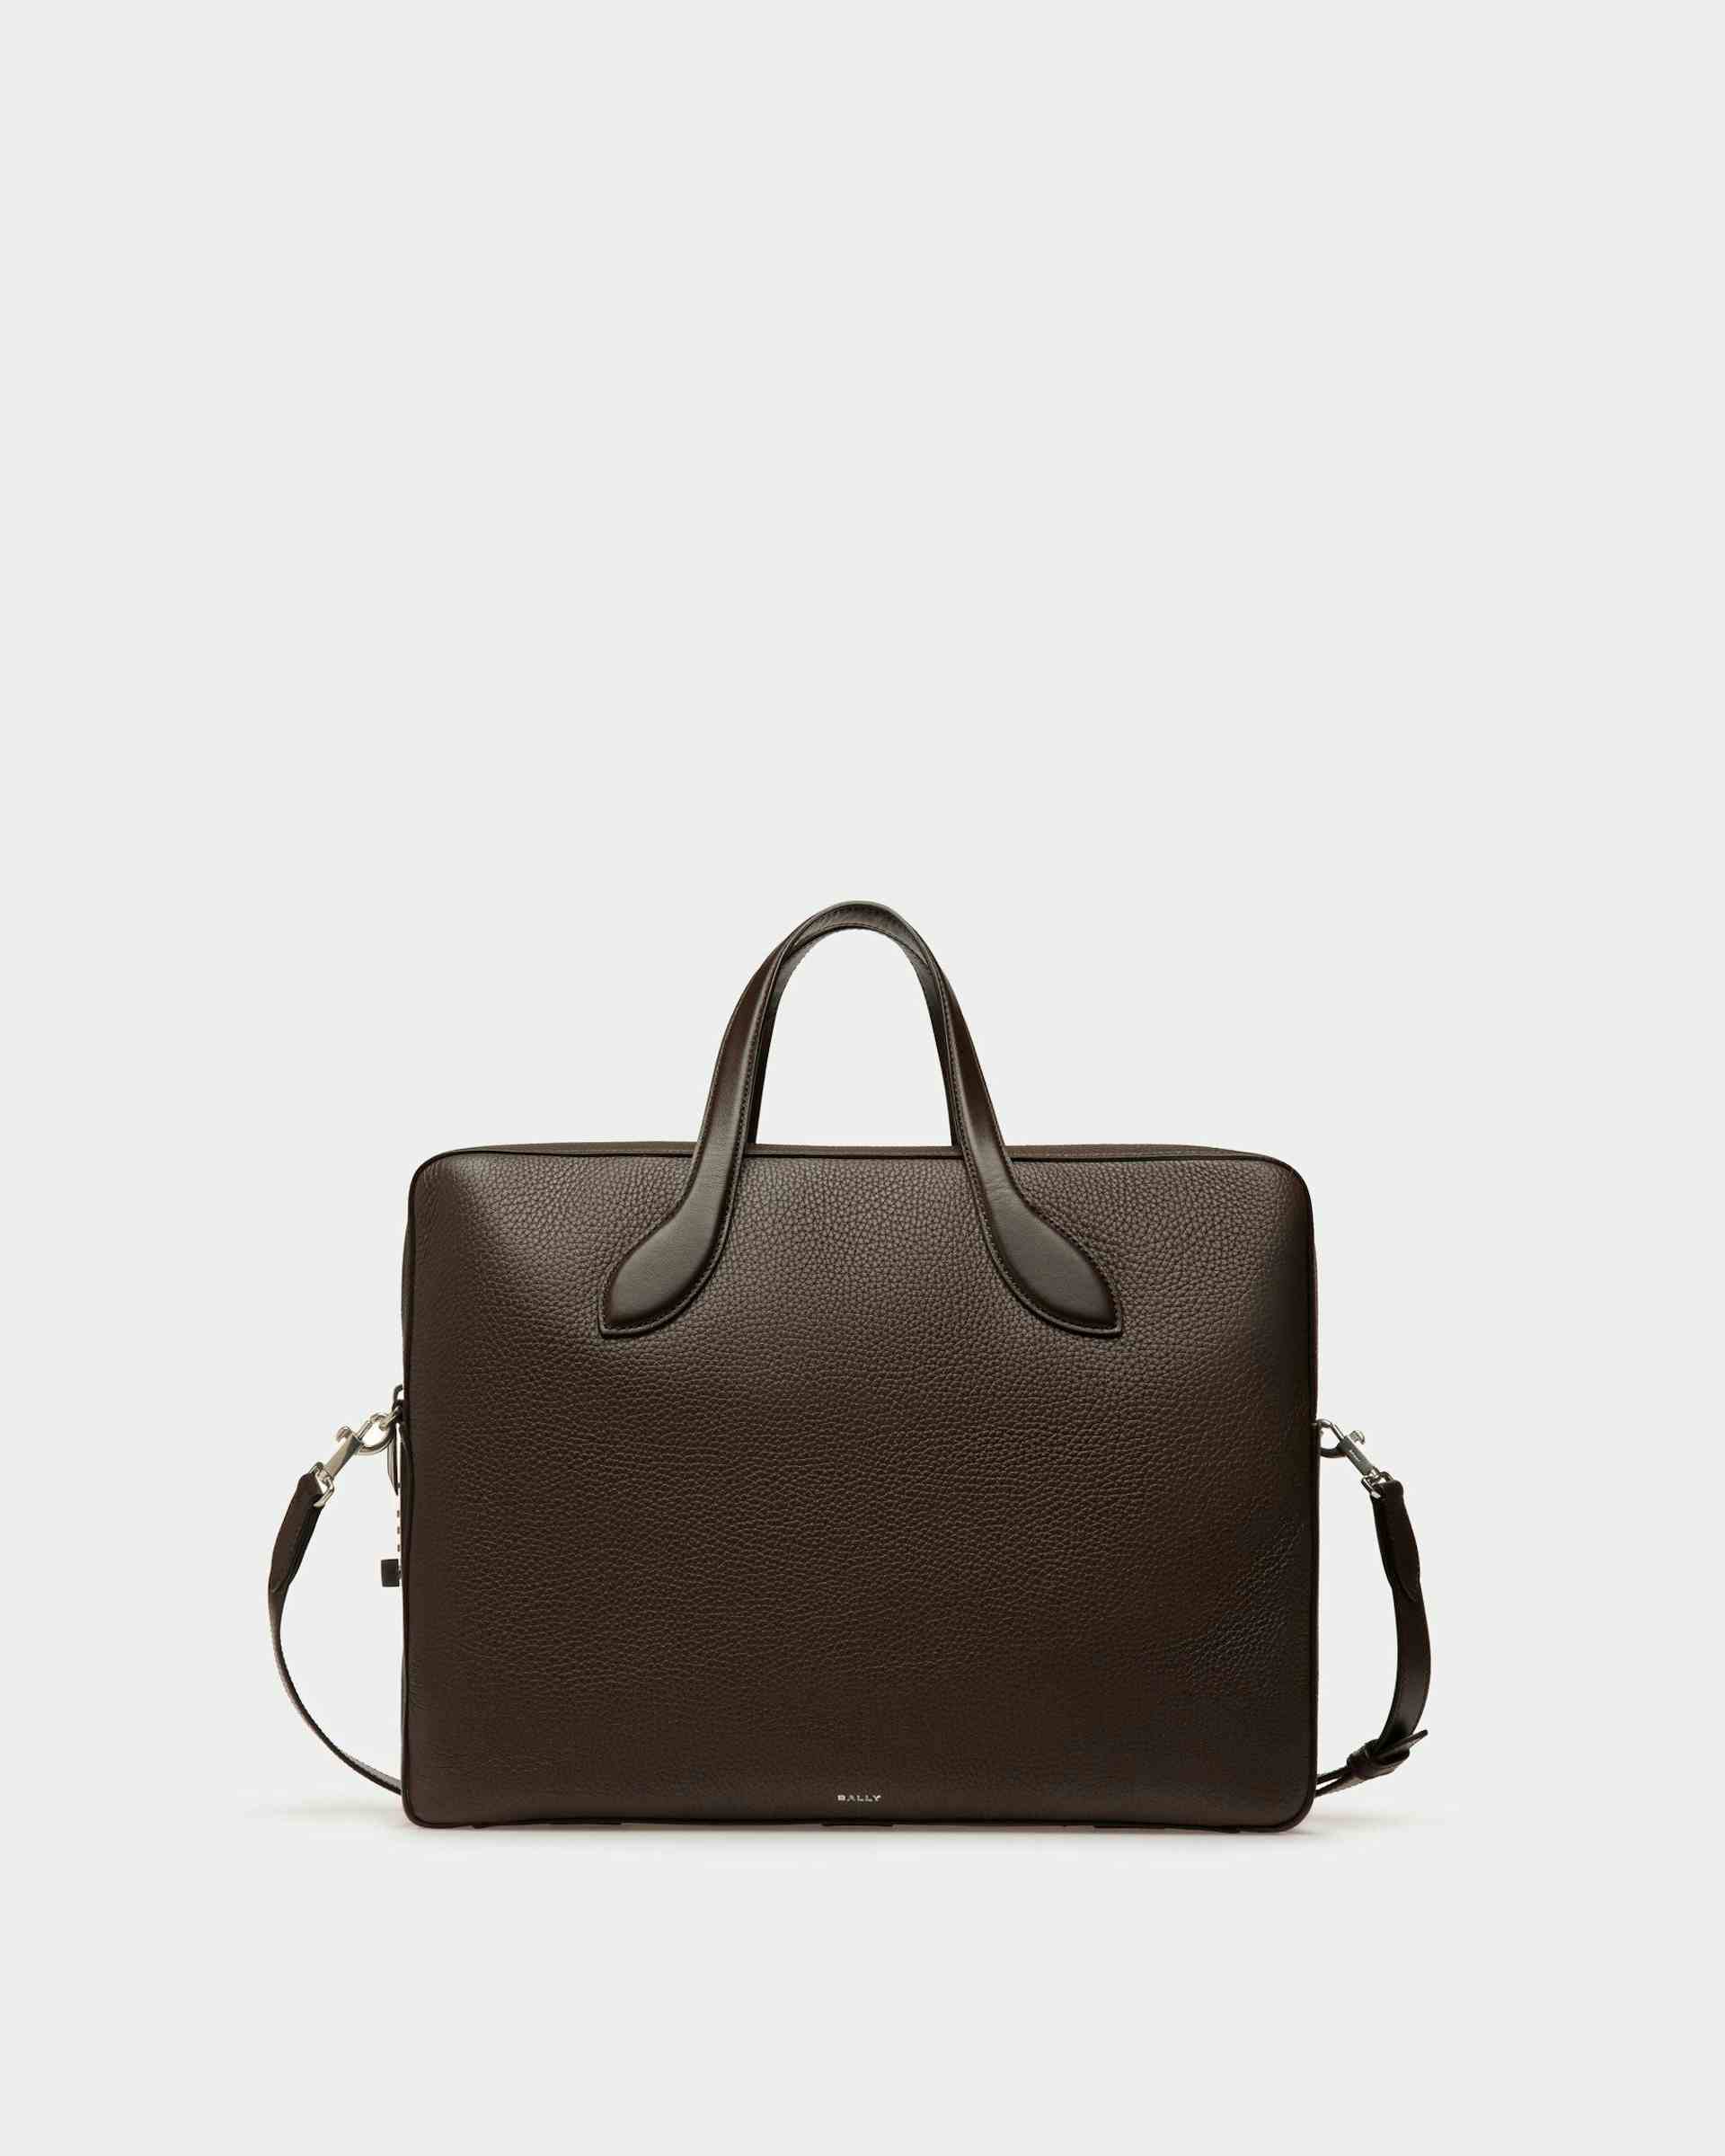 Lago Briefcase In Brown Leather - Men's - Bally